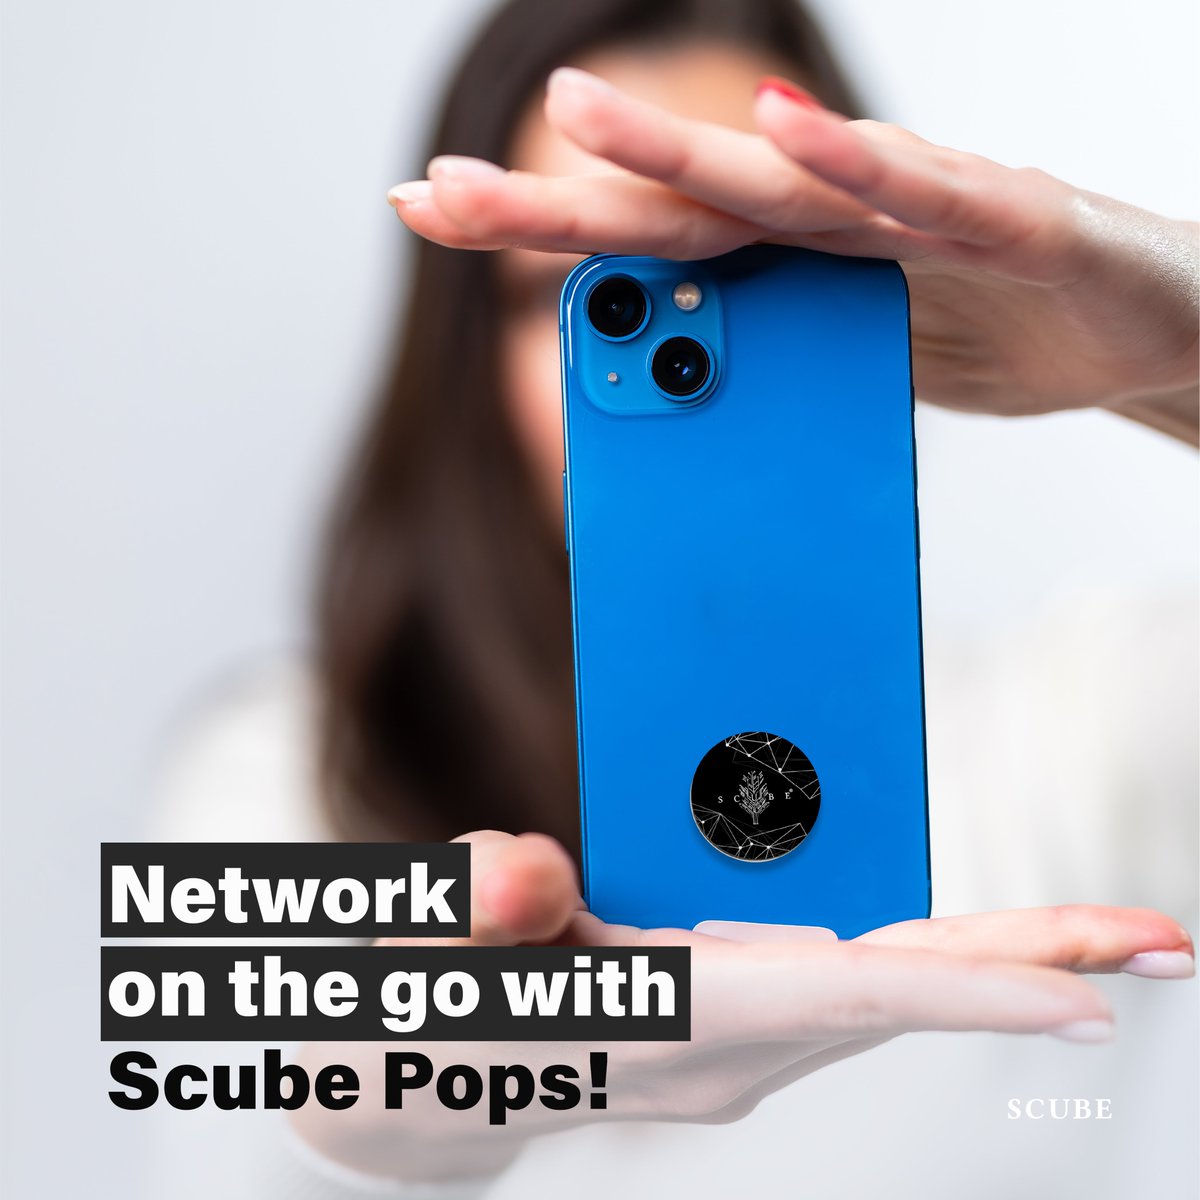 Networking optimised!

Now expand your connections on the go with Scube Pops!

Just stick it behind your smartphone and tap to share your information.

#nfcstickers #nfctags #taptoshare #networking #networkingbusiness #networkingtool #scube #scubepops